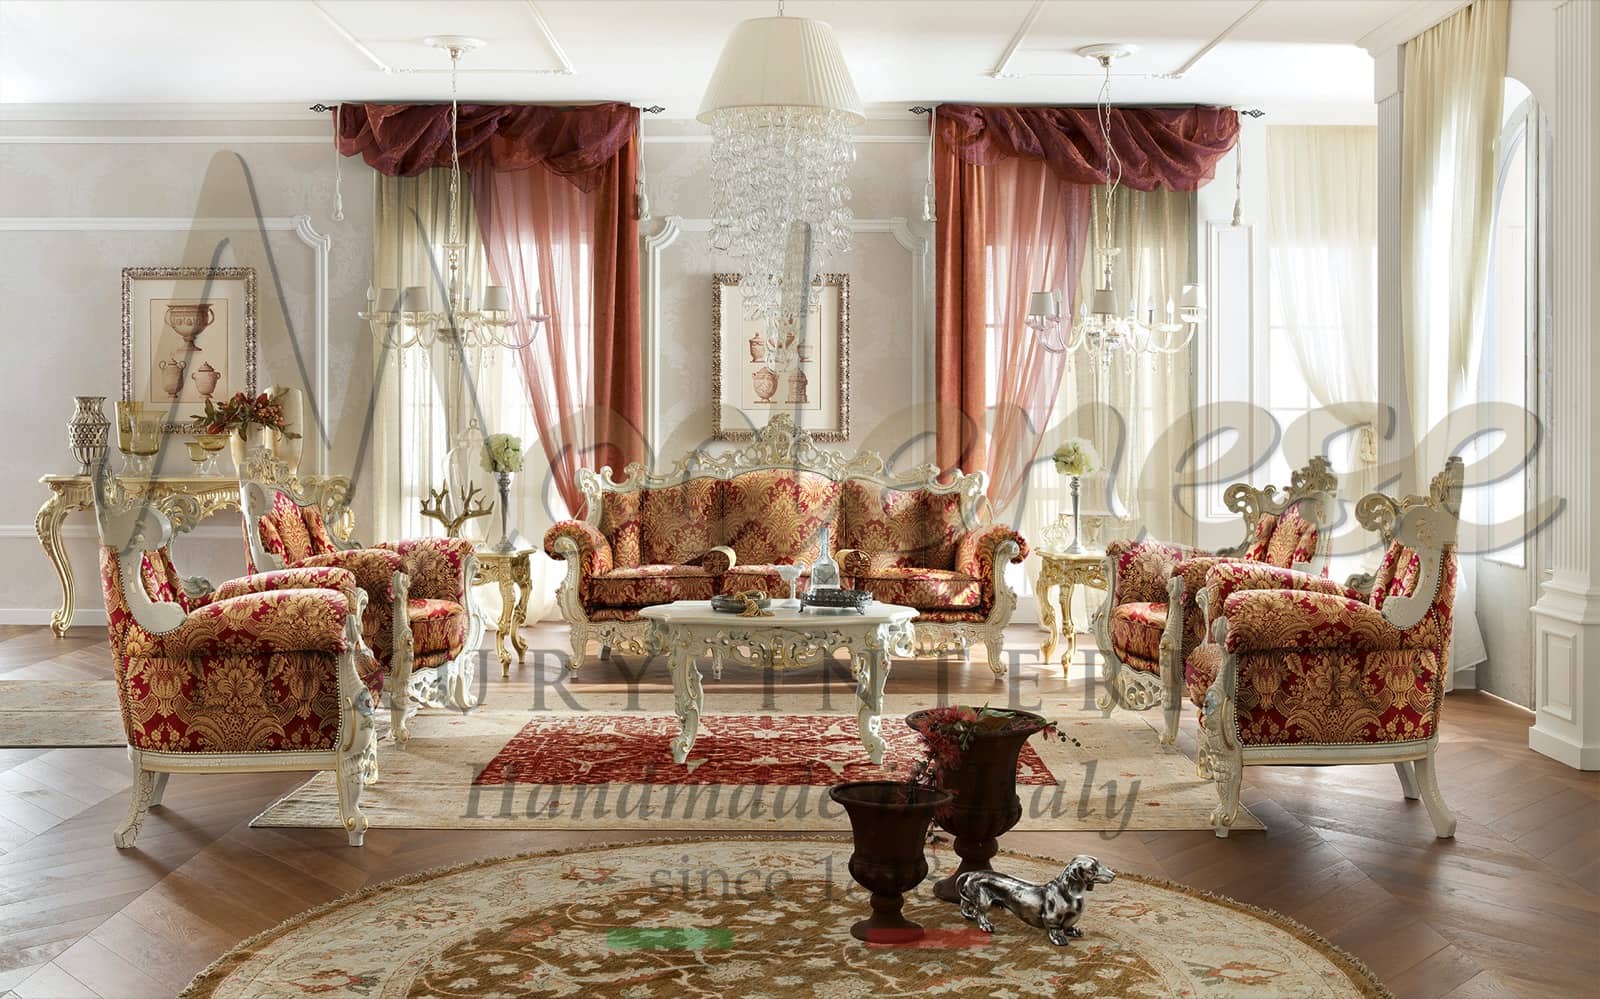 sofa living room majilis luxury classic furniture interior design best quality fabrics materials elegant ornamental handmade production made in Italy Venetia classic Victorian palace royal villa gold carved solid wood home décor top Italian designs